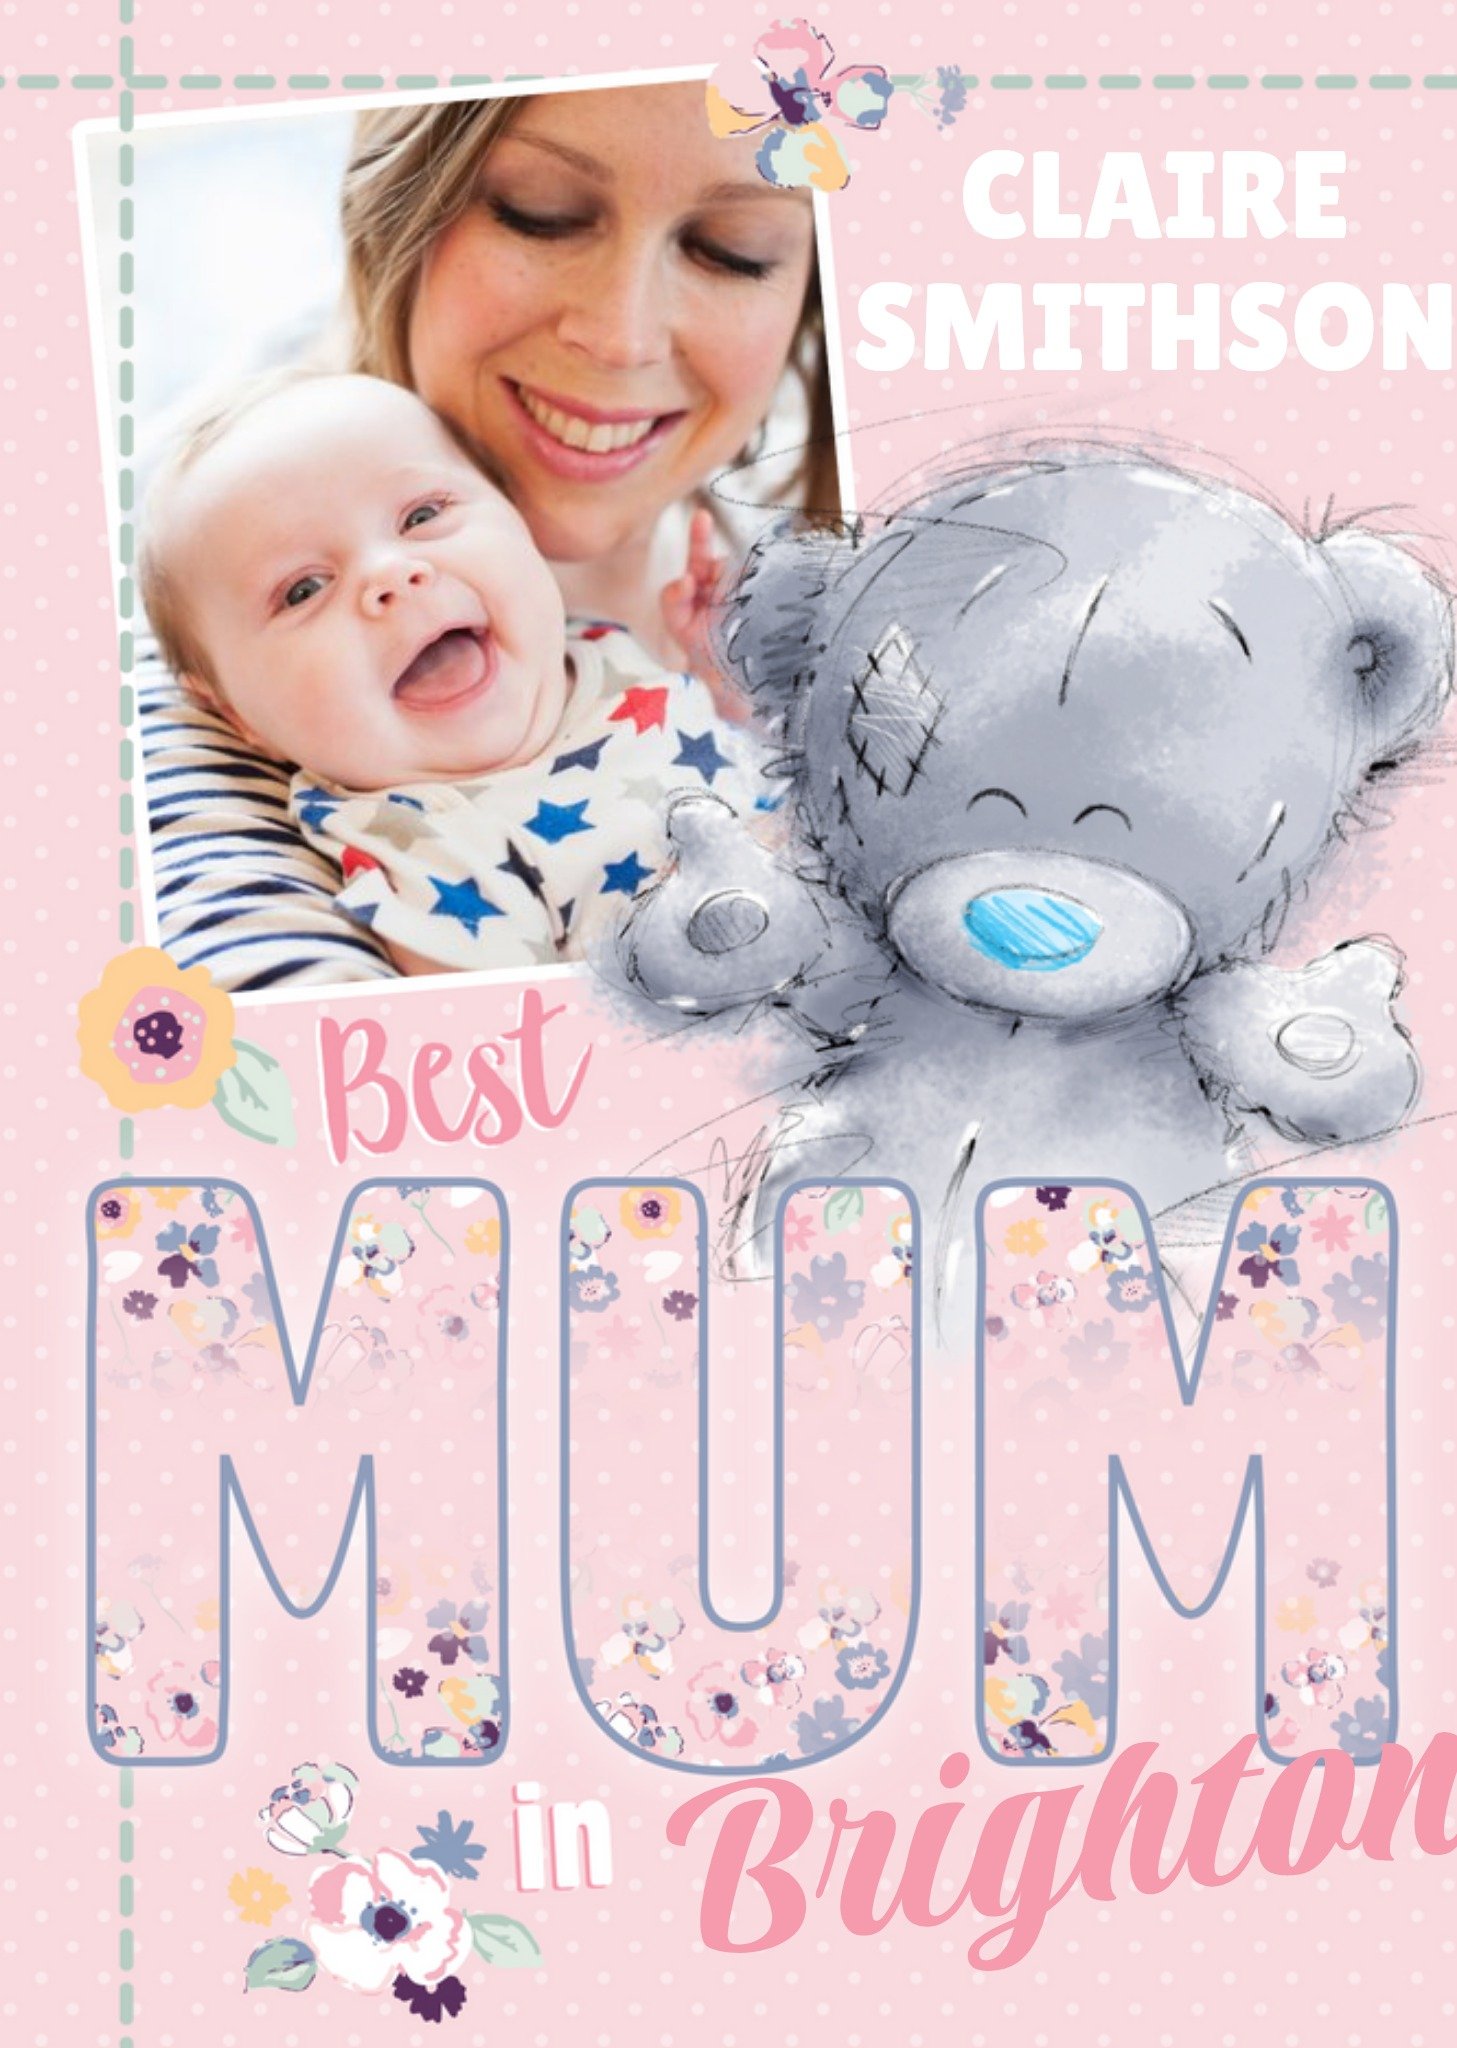 Me To You Mother's Day Card Tatty Teddy Photo Upload Best Mum In Place Ecard